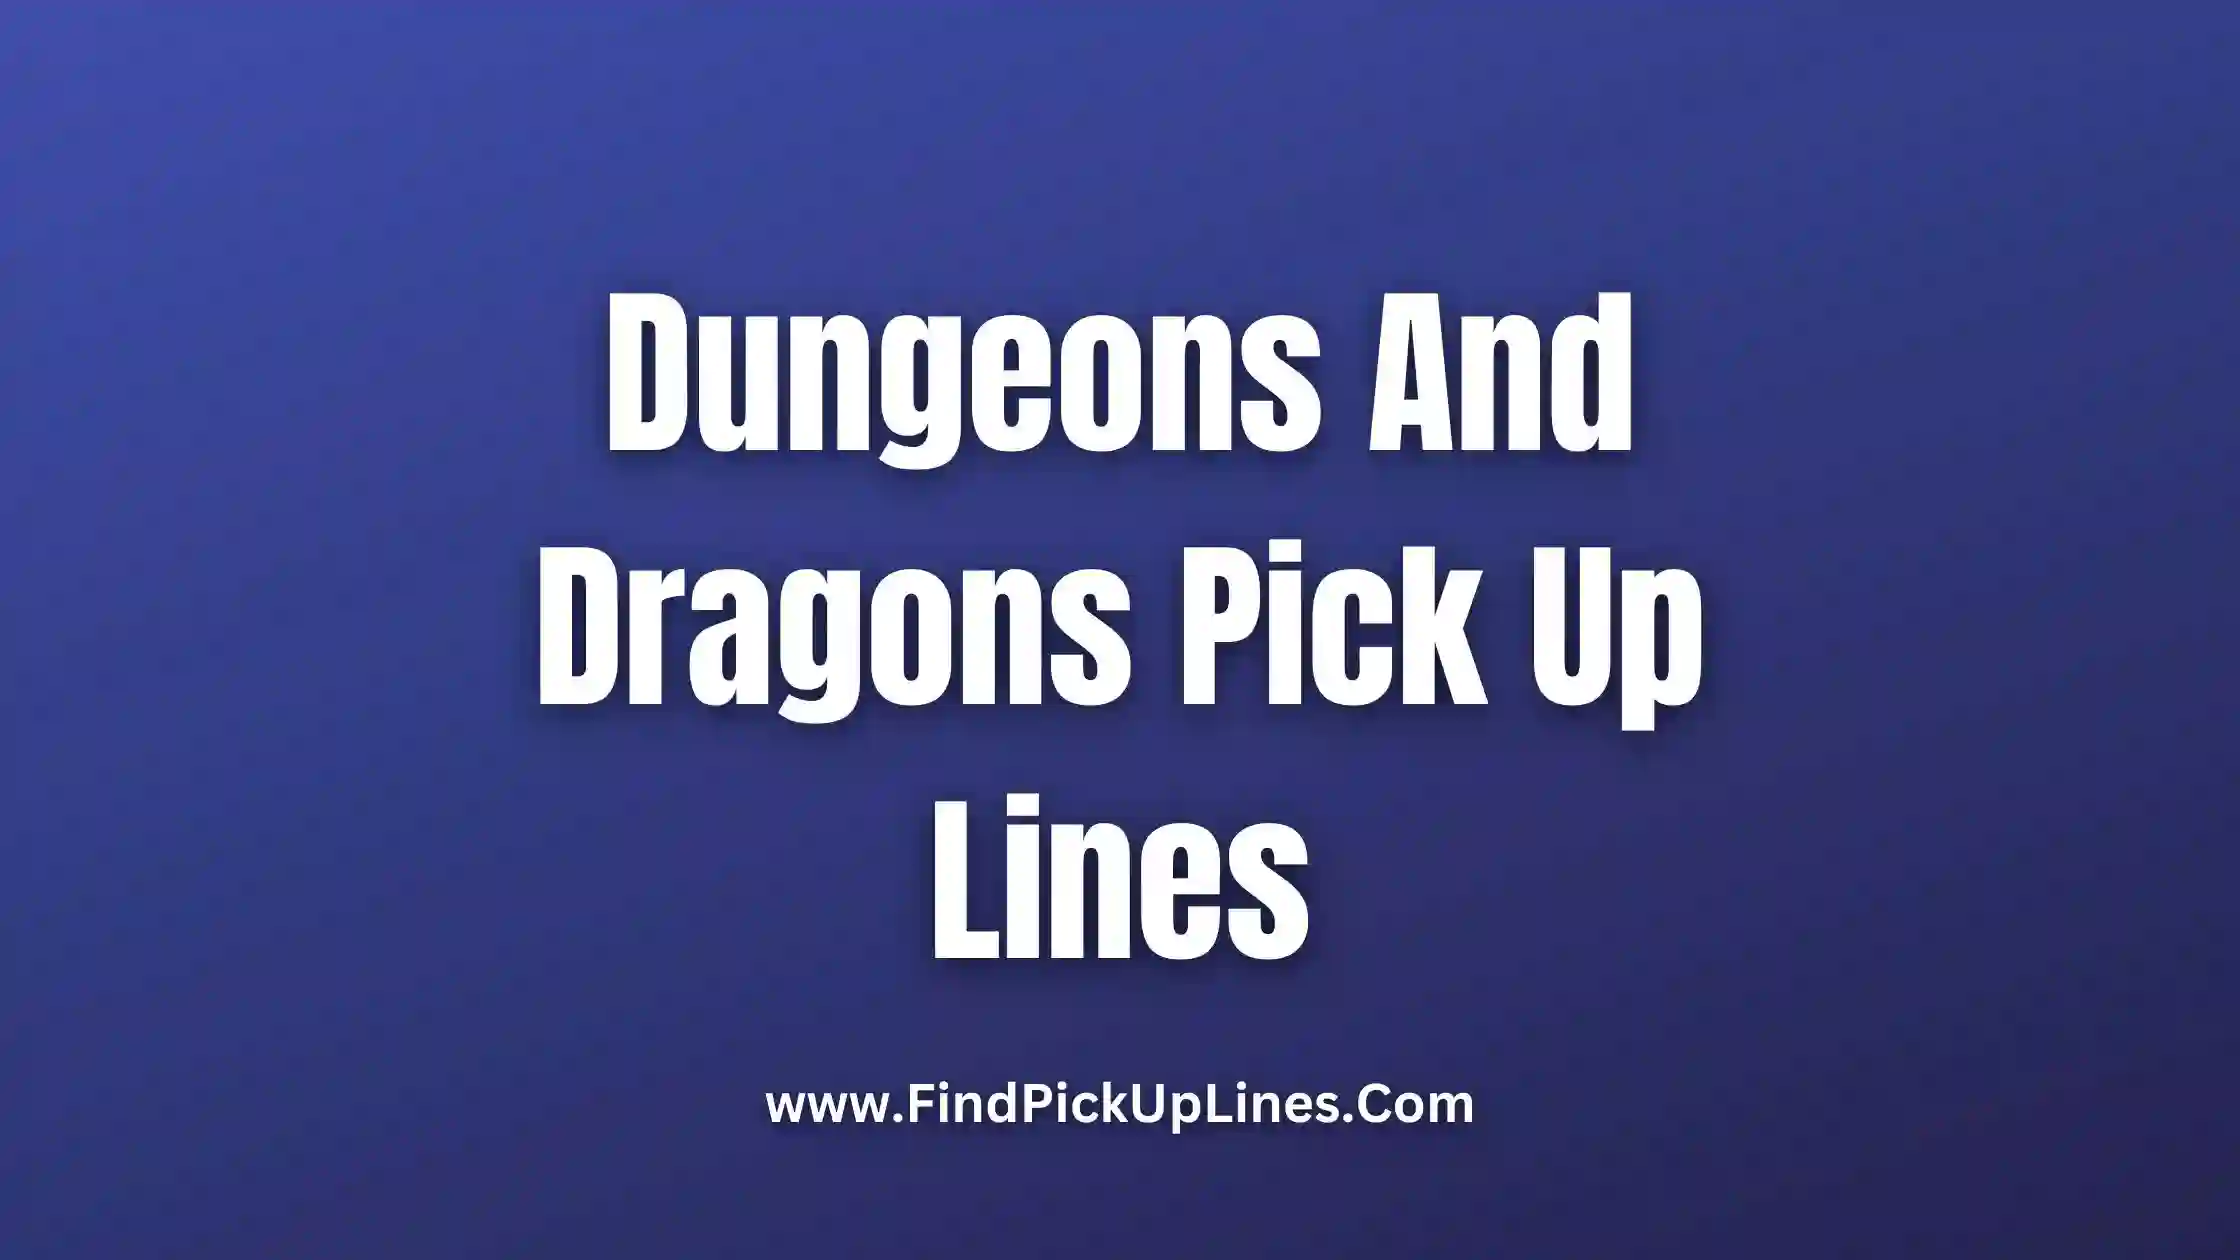 Dungeons And Dragons Pick Up Lines